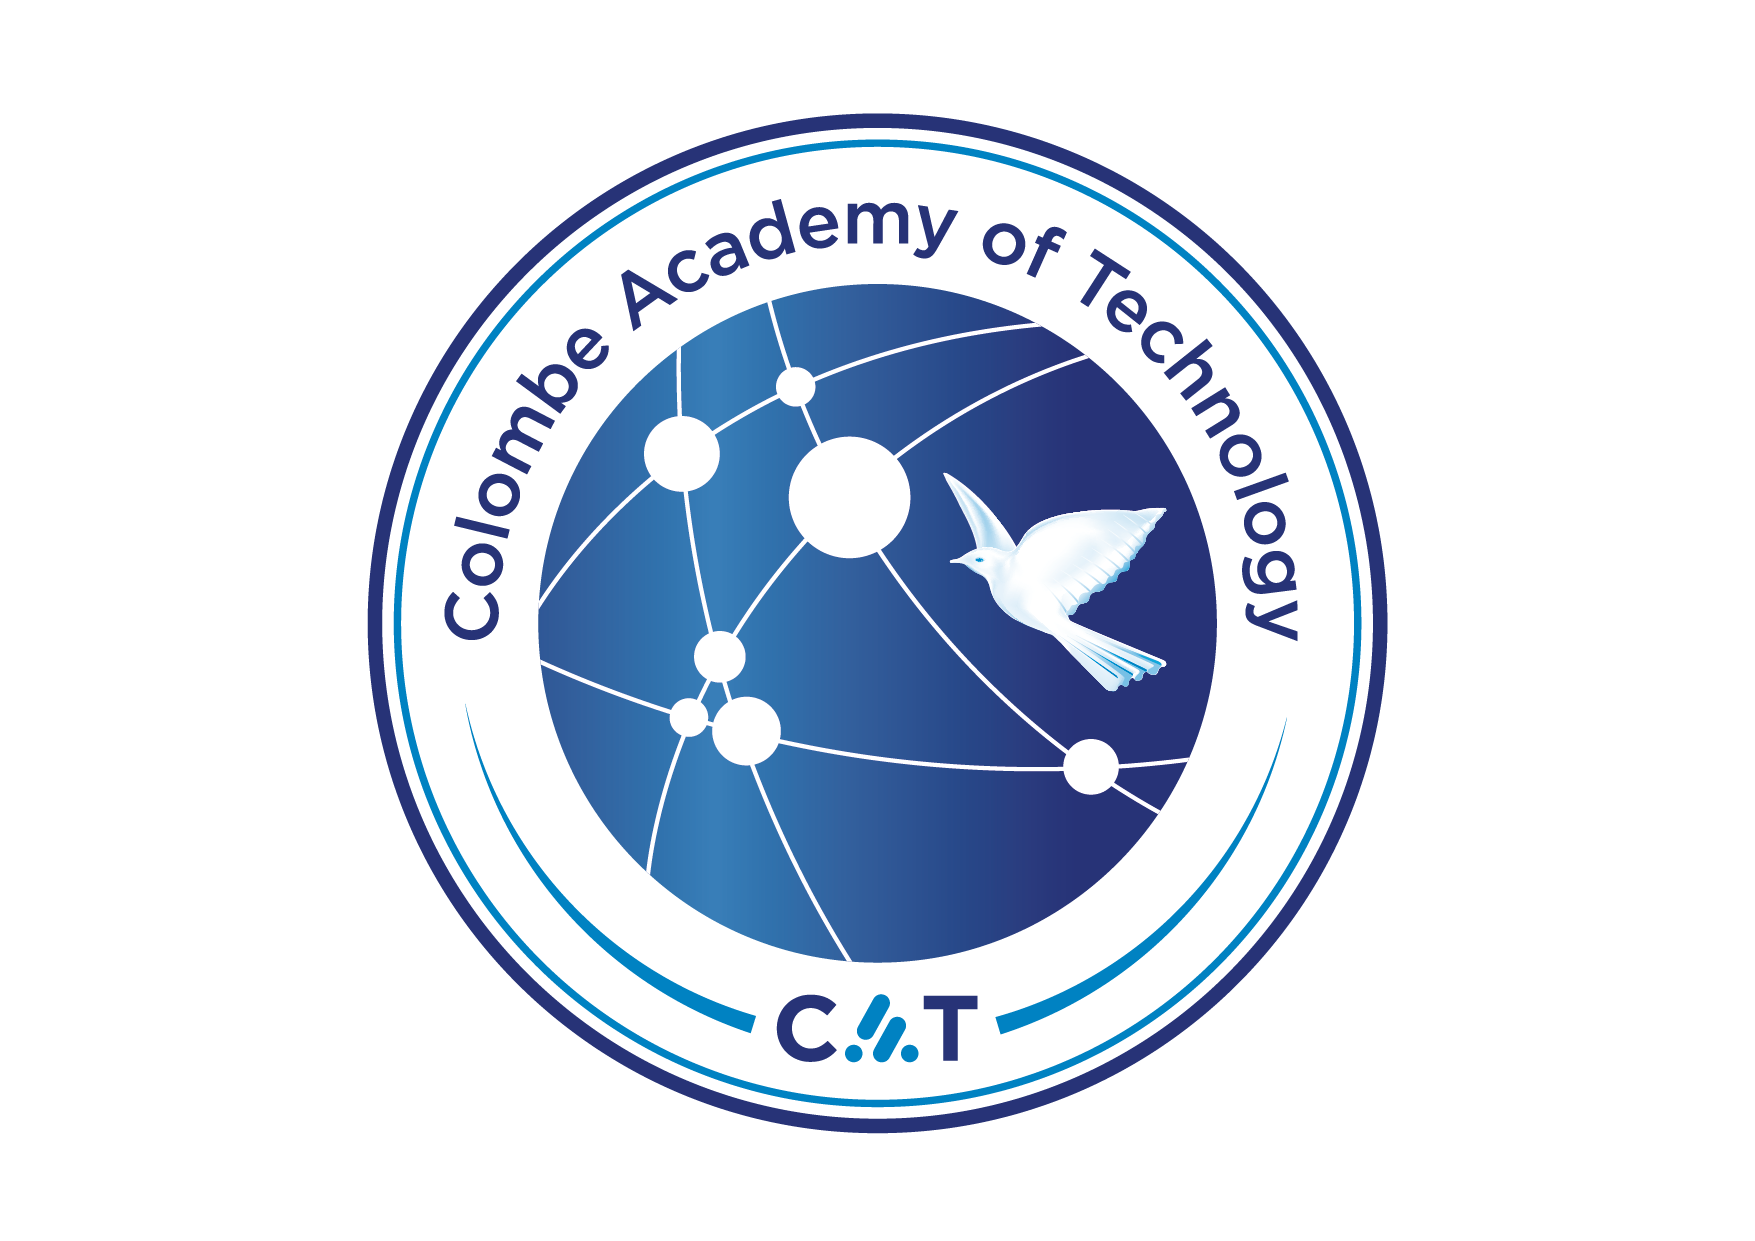 CAT (Colombe Academy of Technology)